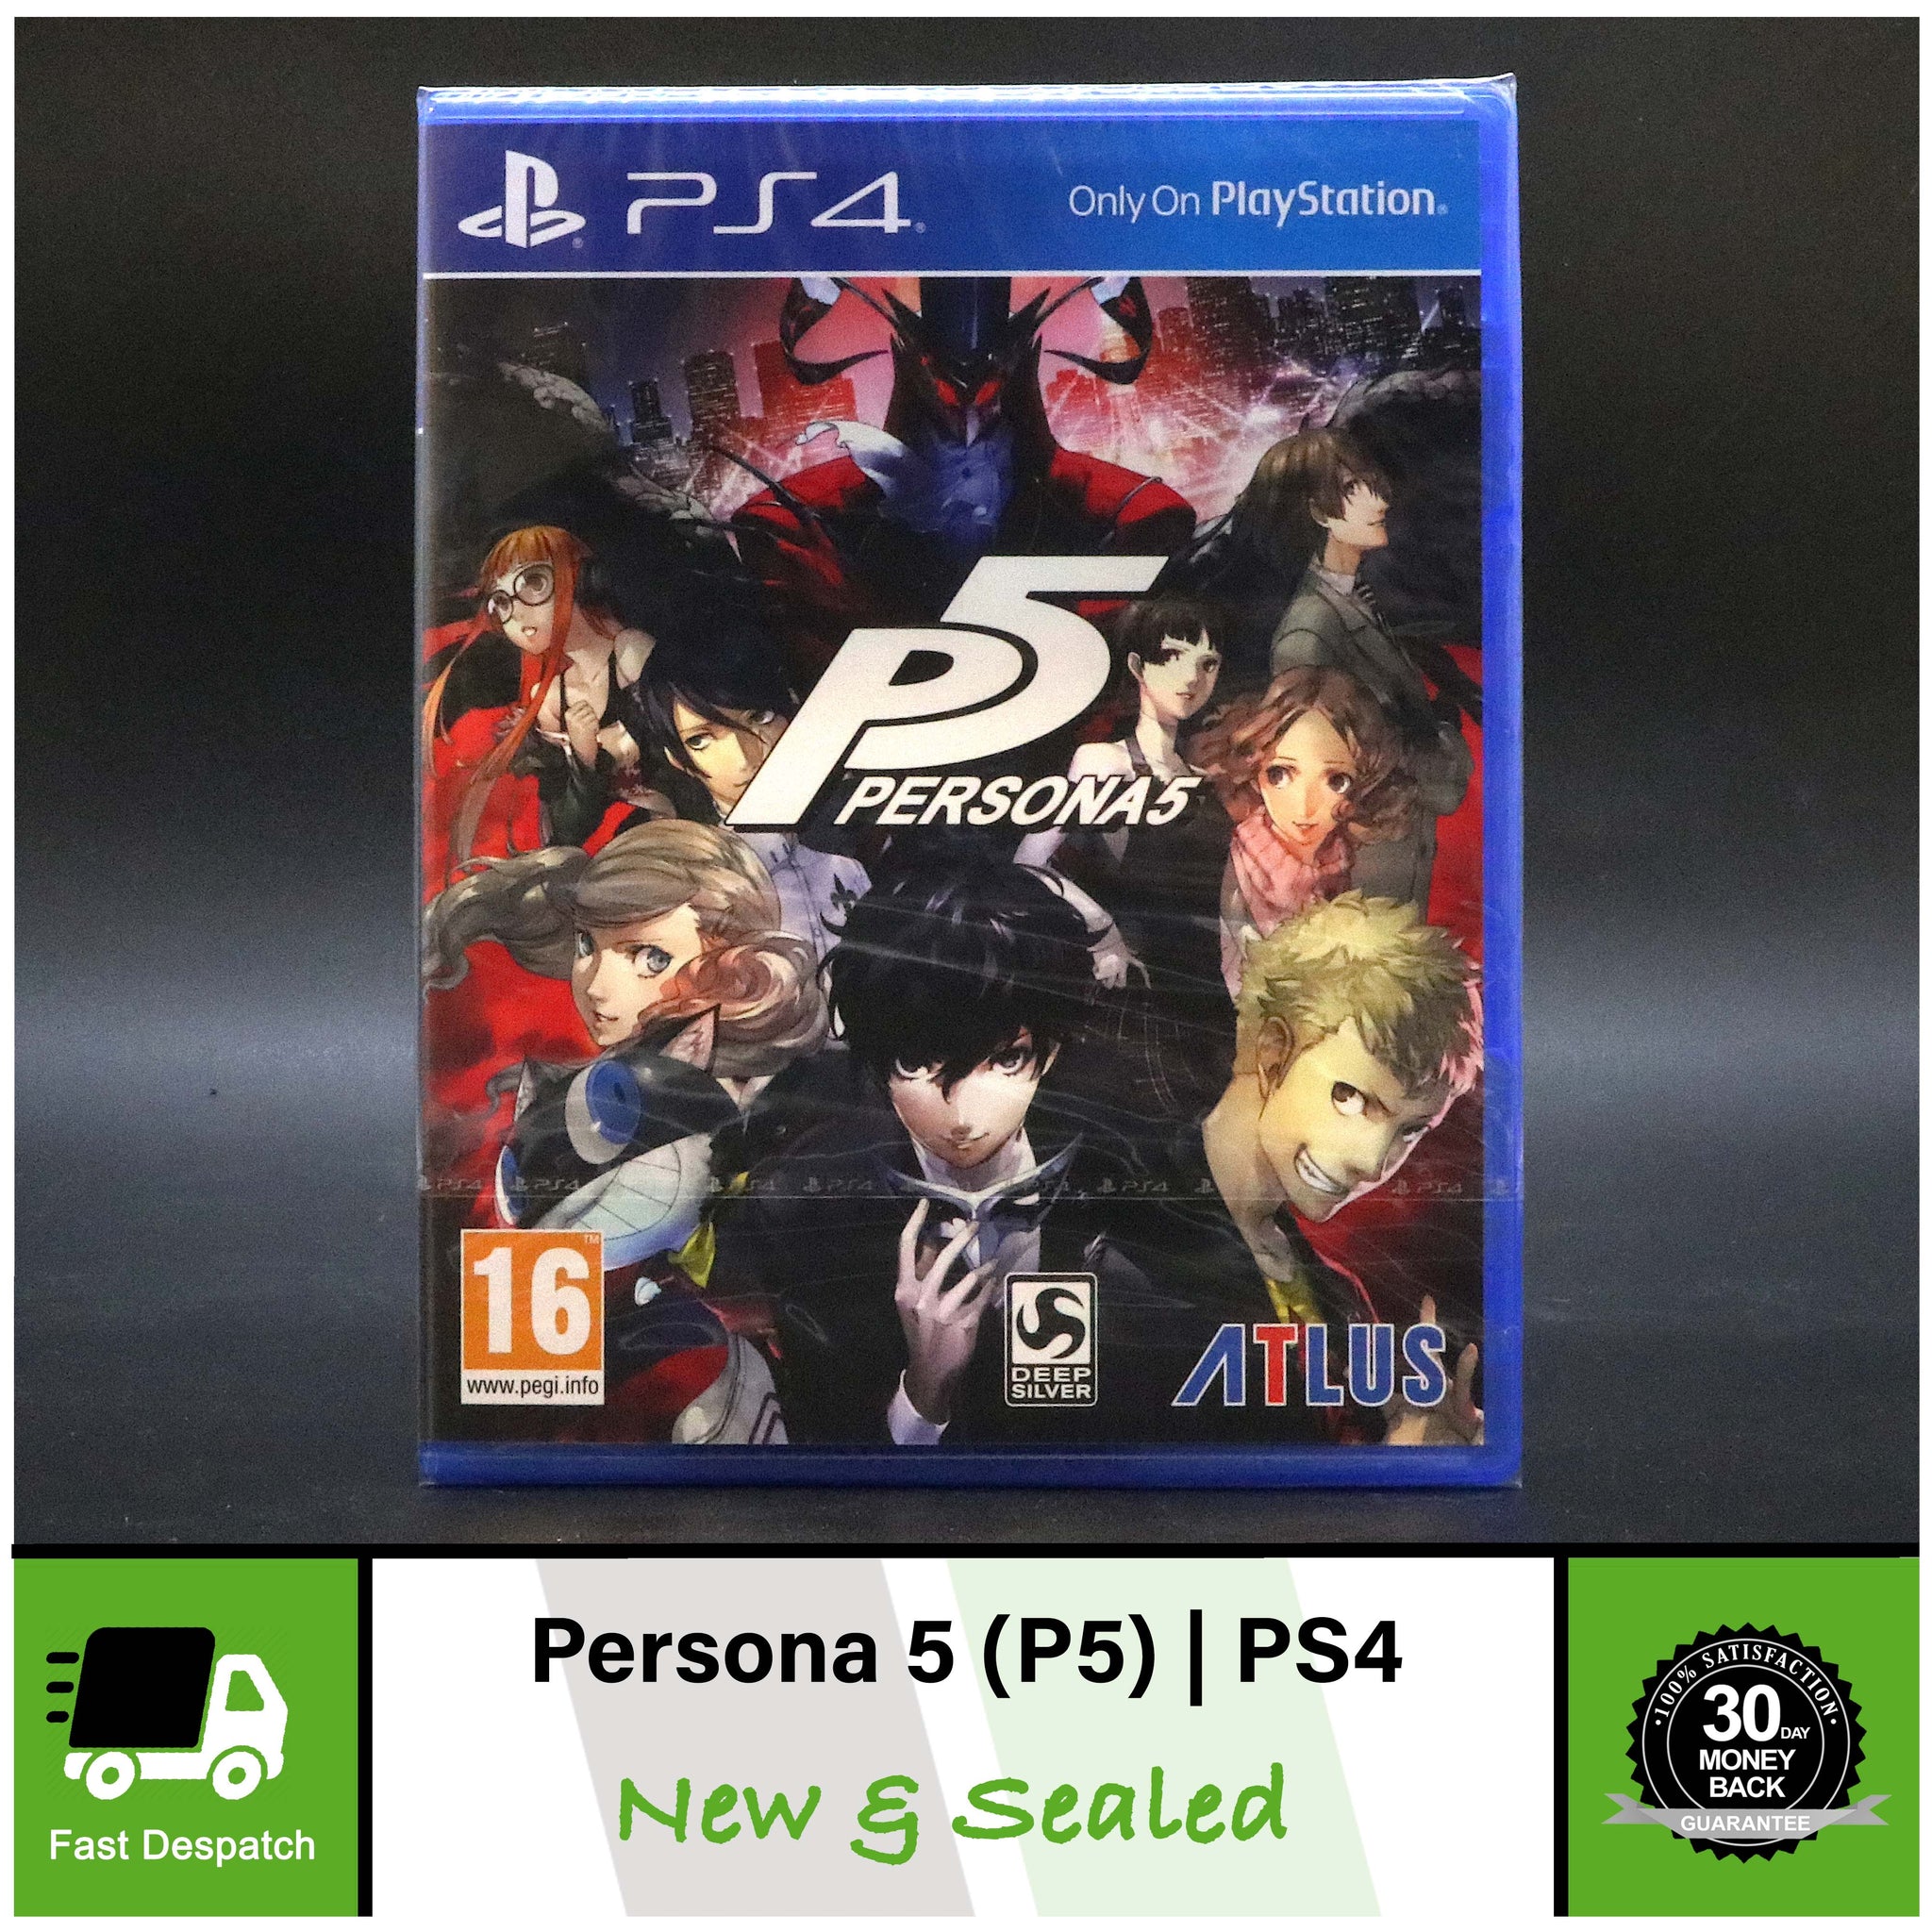 Persona 5 | P5 | Sony PS4 PlayStation 4 Game | New & Factory Sealed Tear Strip